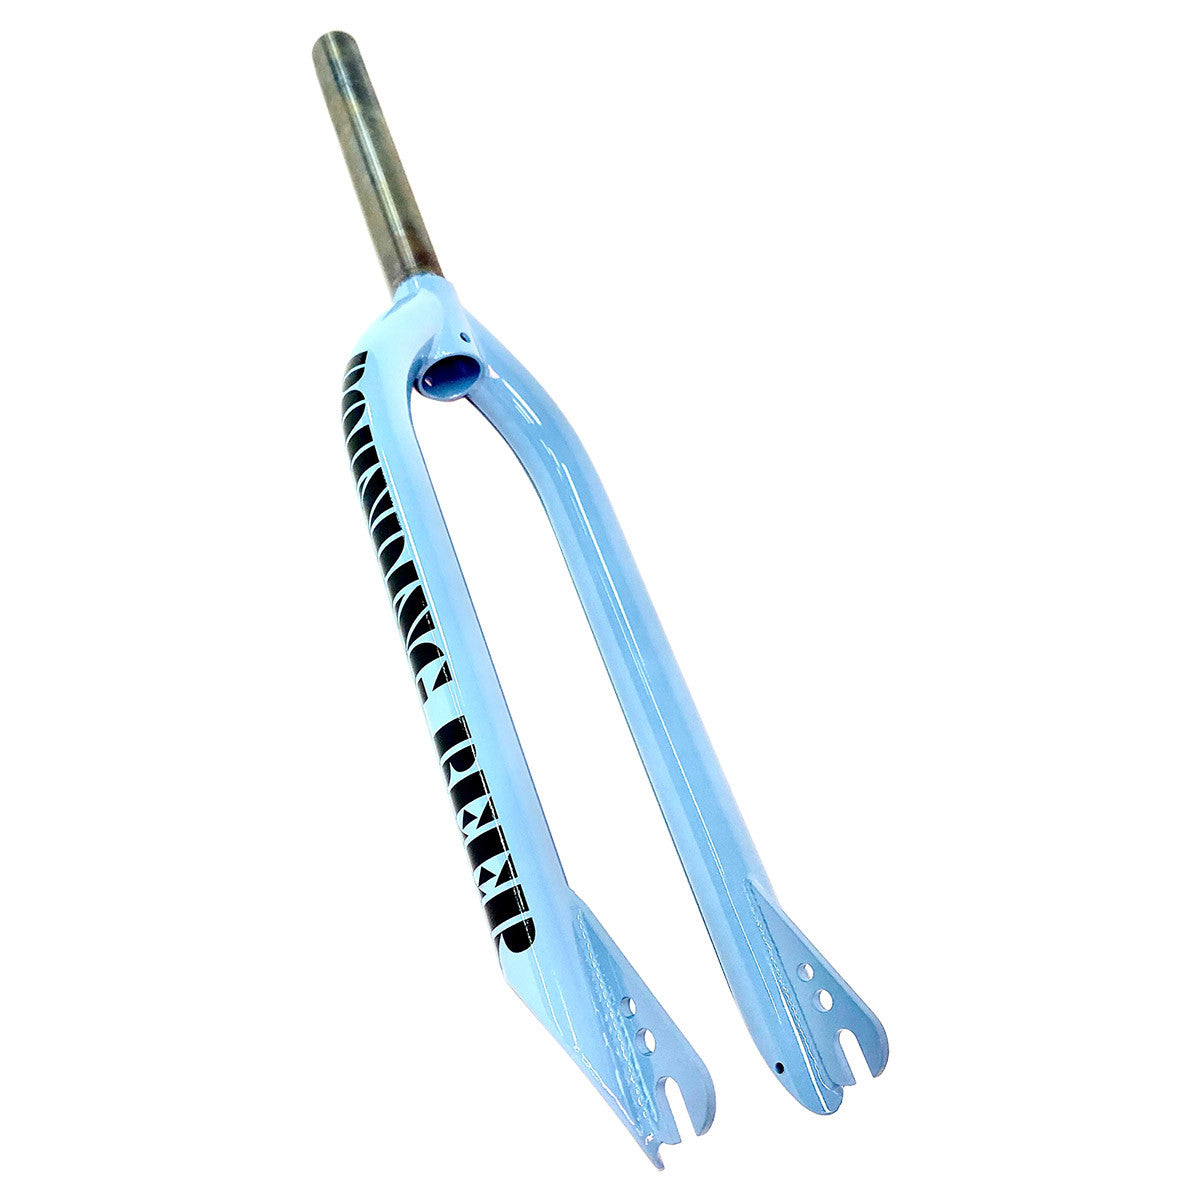 S&M "Pounding Beer" 26" Threadless BMX Fork - Baby Blue - Made in USA